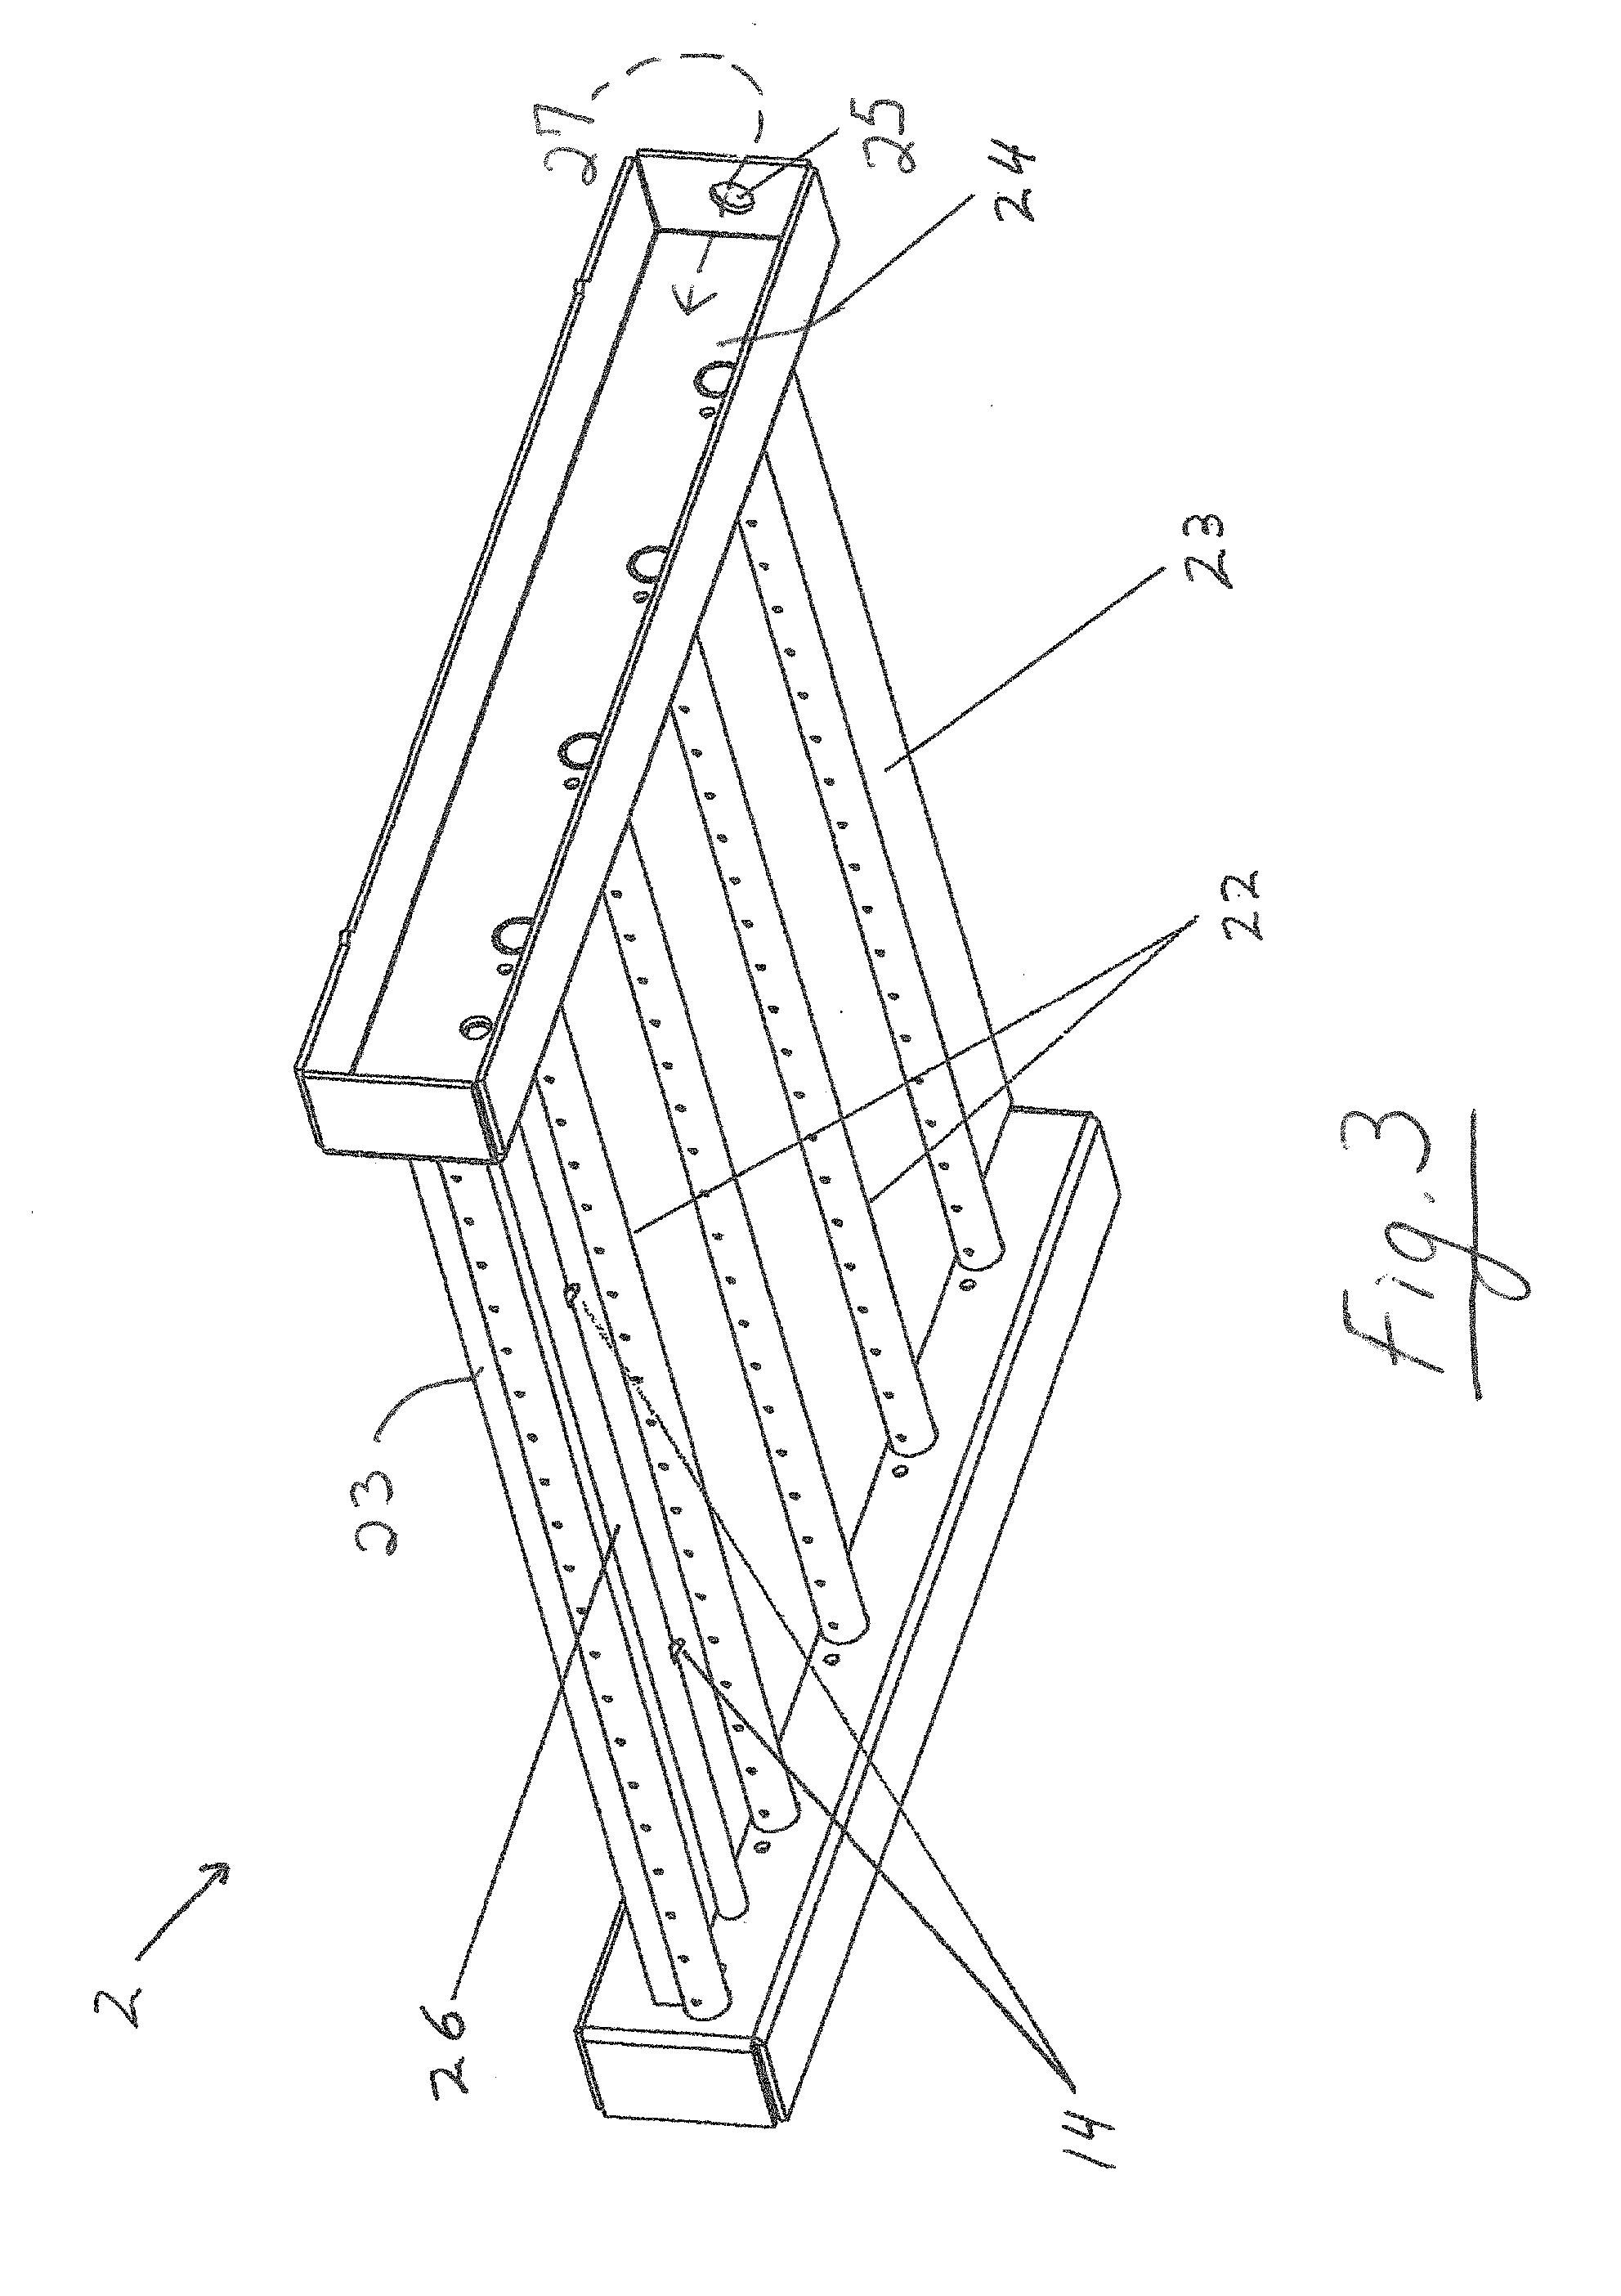 Control system for monitoring and adjusting combustion performance in a cordwood-fired heating appliance